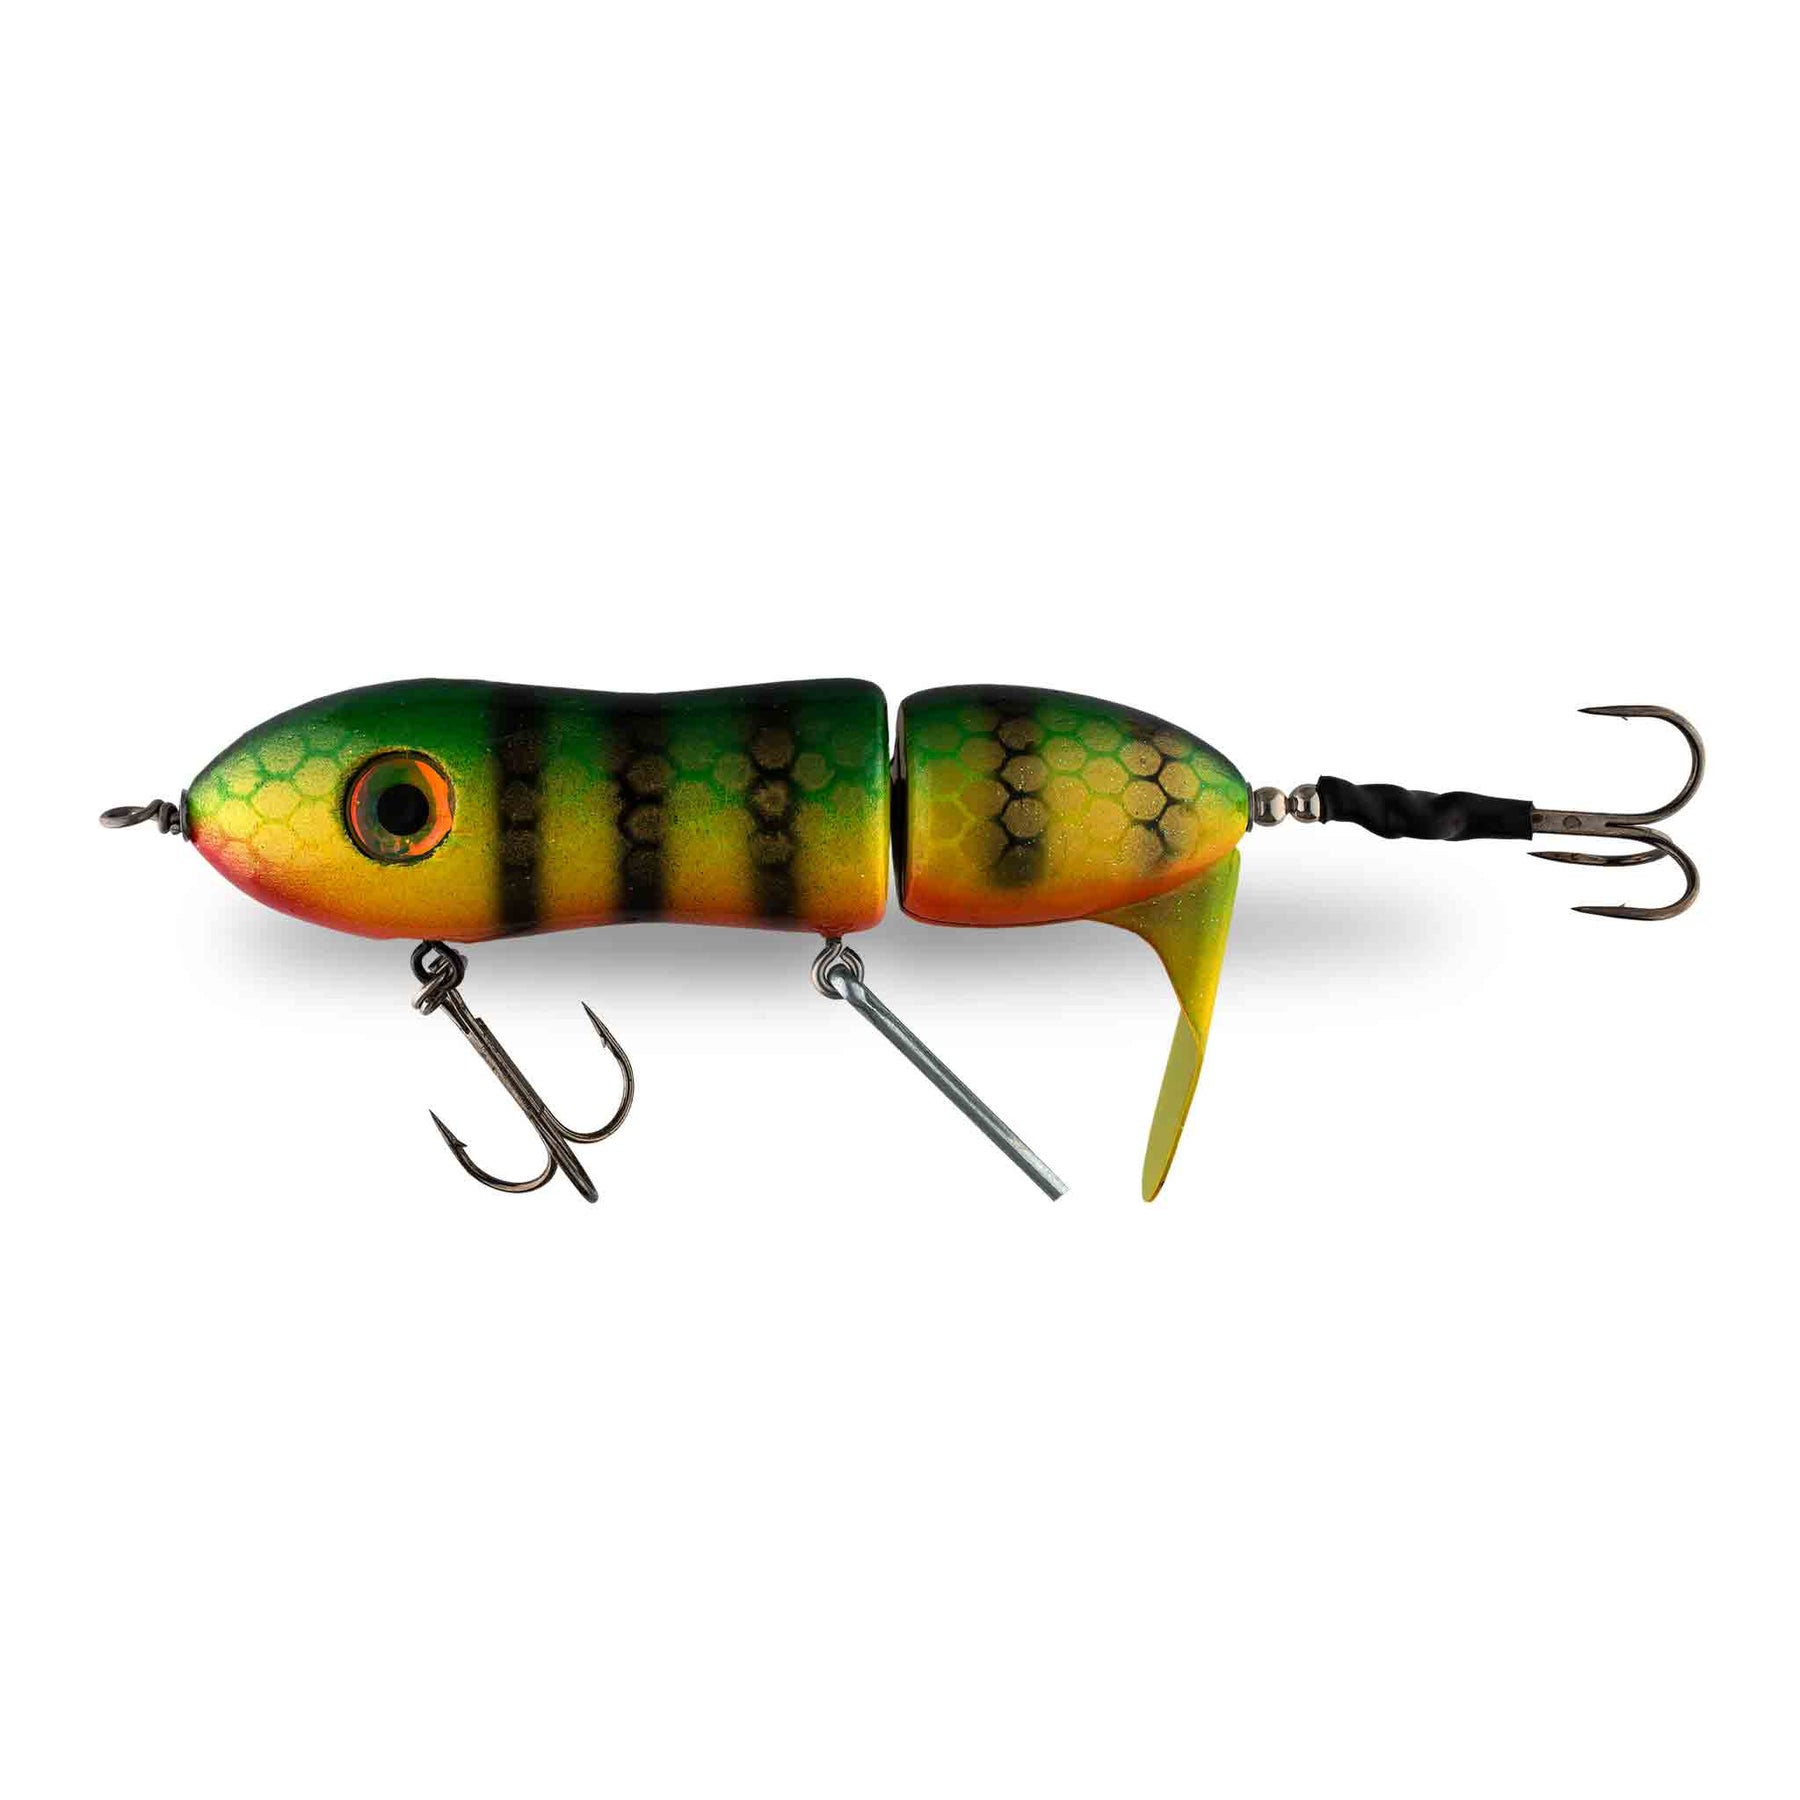 View of Topwater Big Mama Twis'td Sis'tr Clicker Propbait Round Lake Perch available at EZOKO Pike and Musky Shop